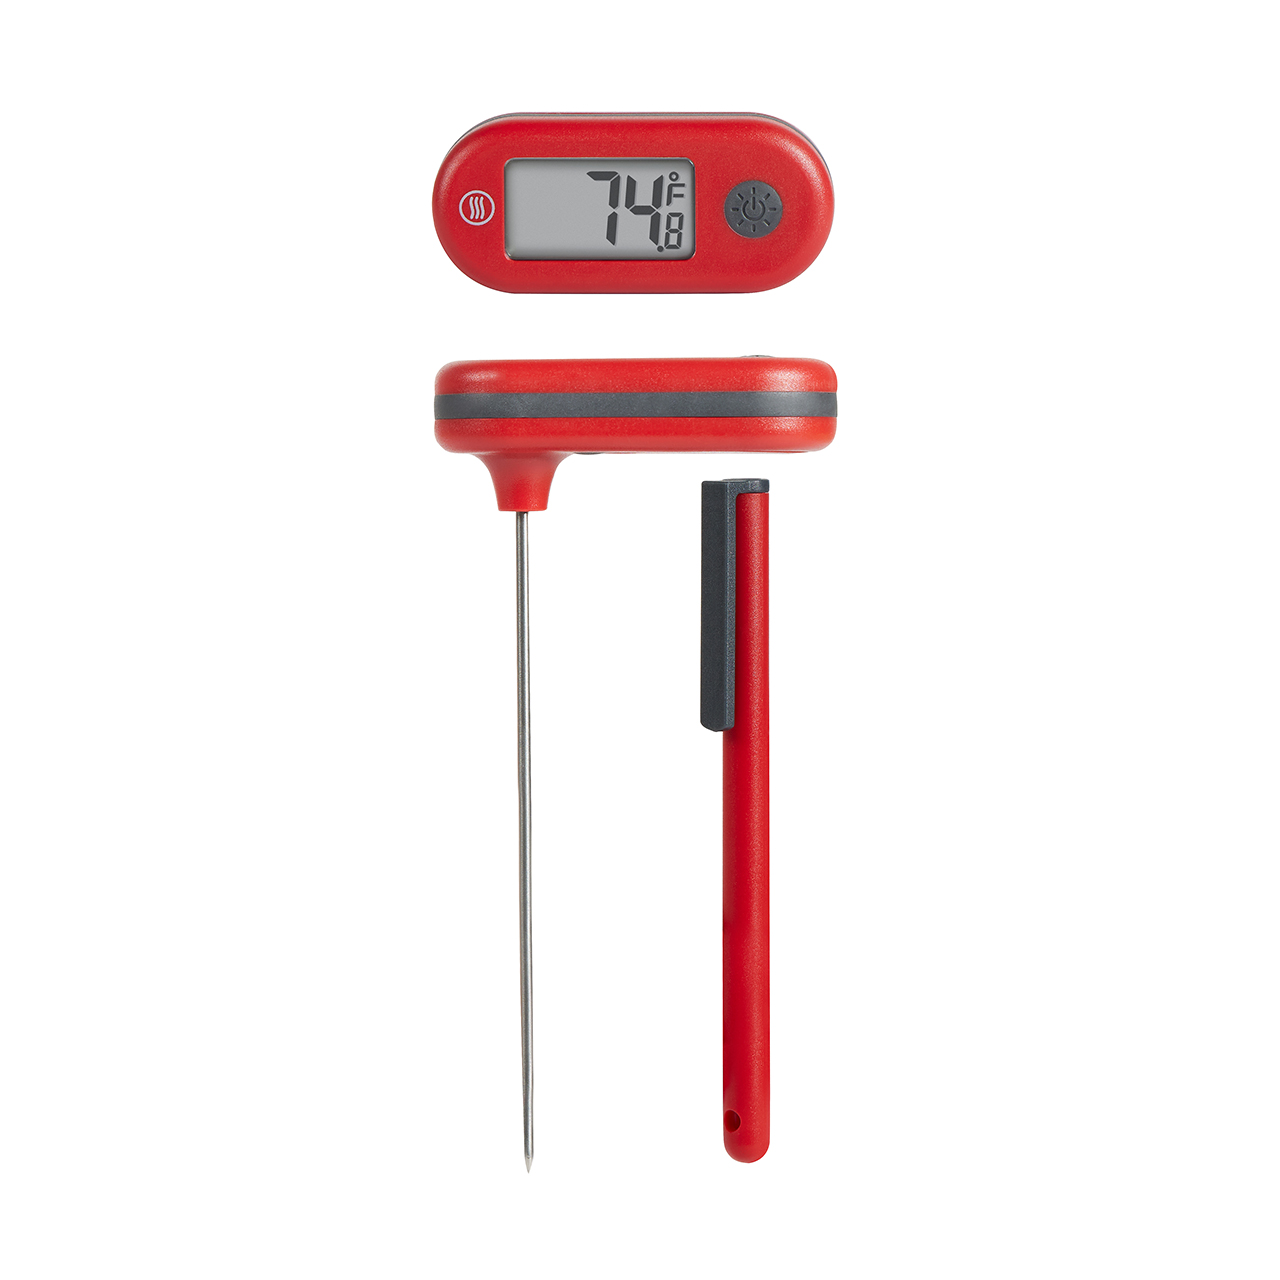 ATD® 3412 - Digital Pocket Thermometer with Pocket Clip (-58°F to 302°F) 